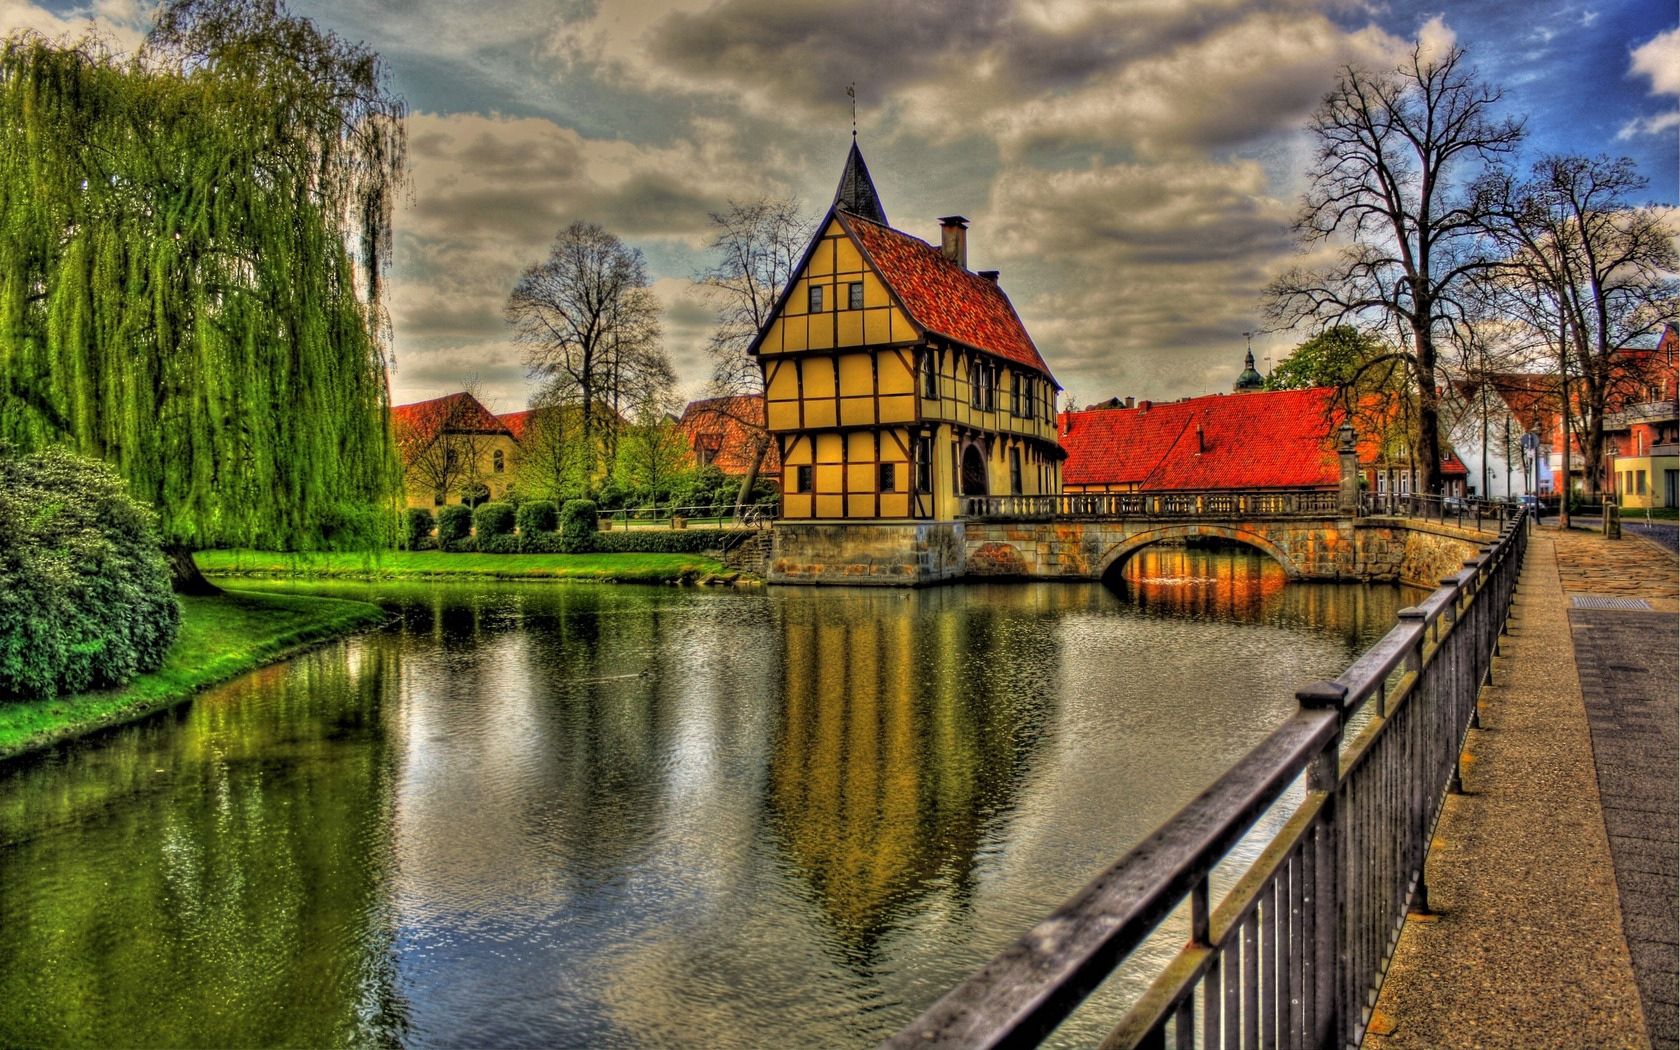 Download mobile wallpaper Architecture, Hdr, Cities, Rivers, Germany, Grass, Trees, Water, Houses, Sky, Clouds, City, Reflection, Road, Beauty, House, Bridge, Colors, Color, View, Colorful for free.